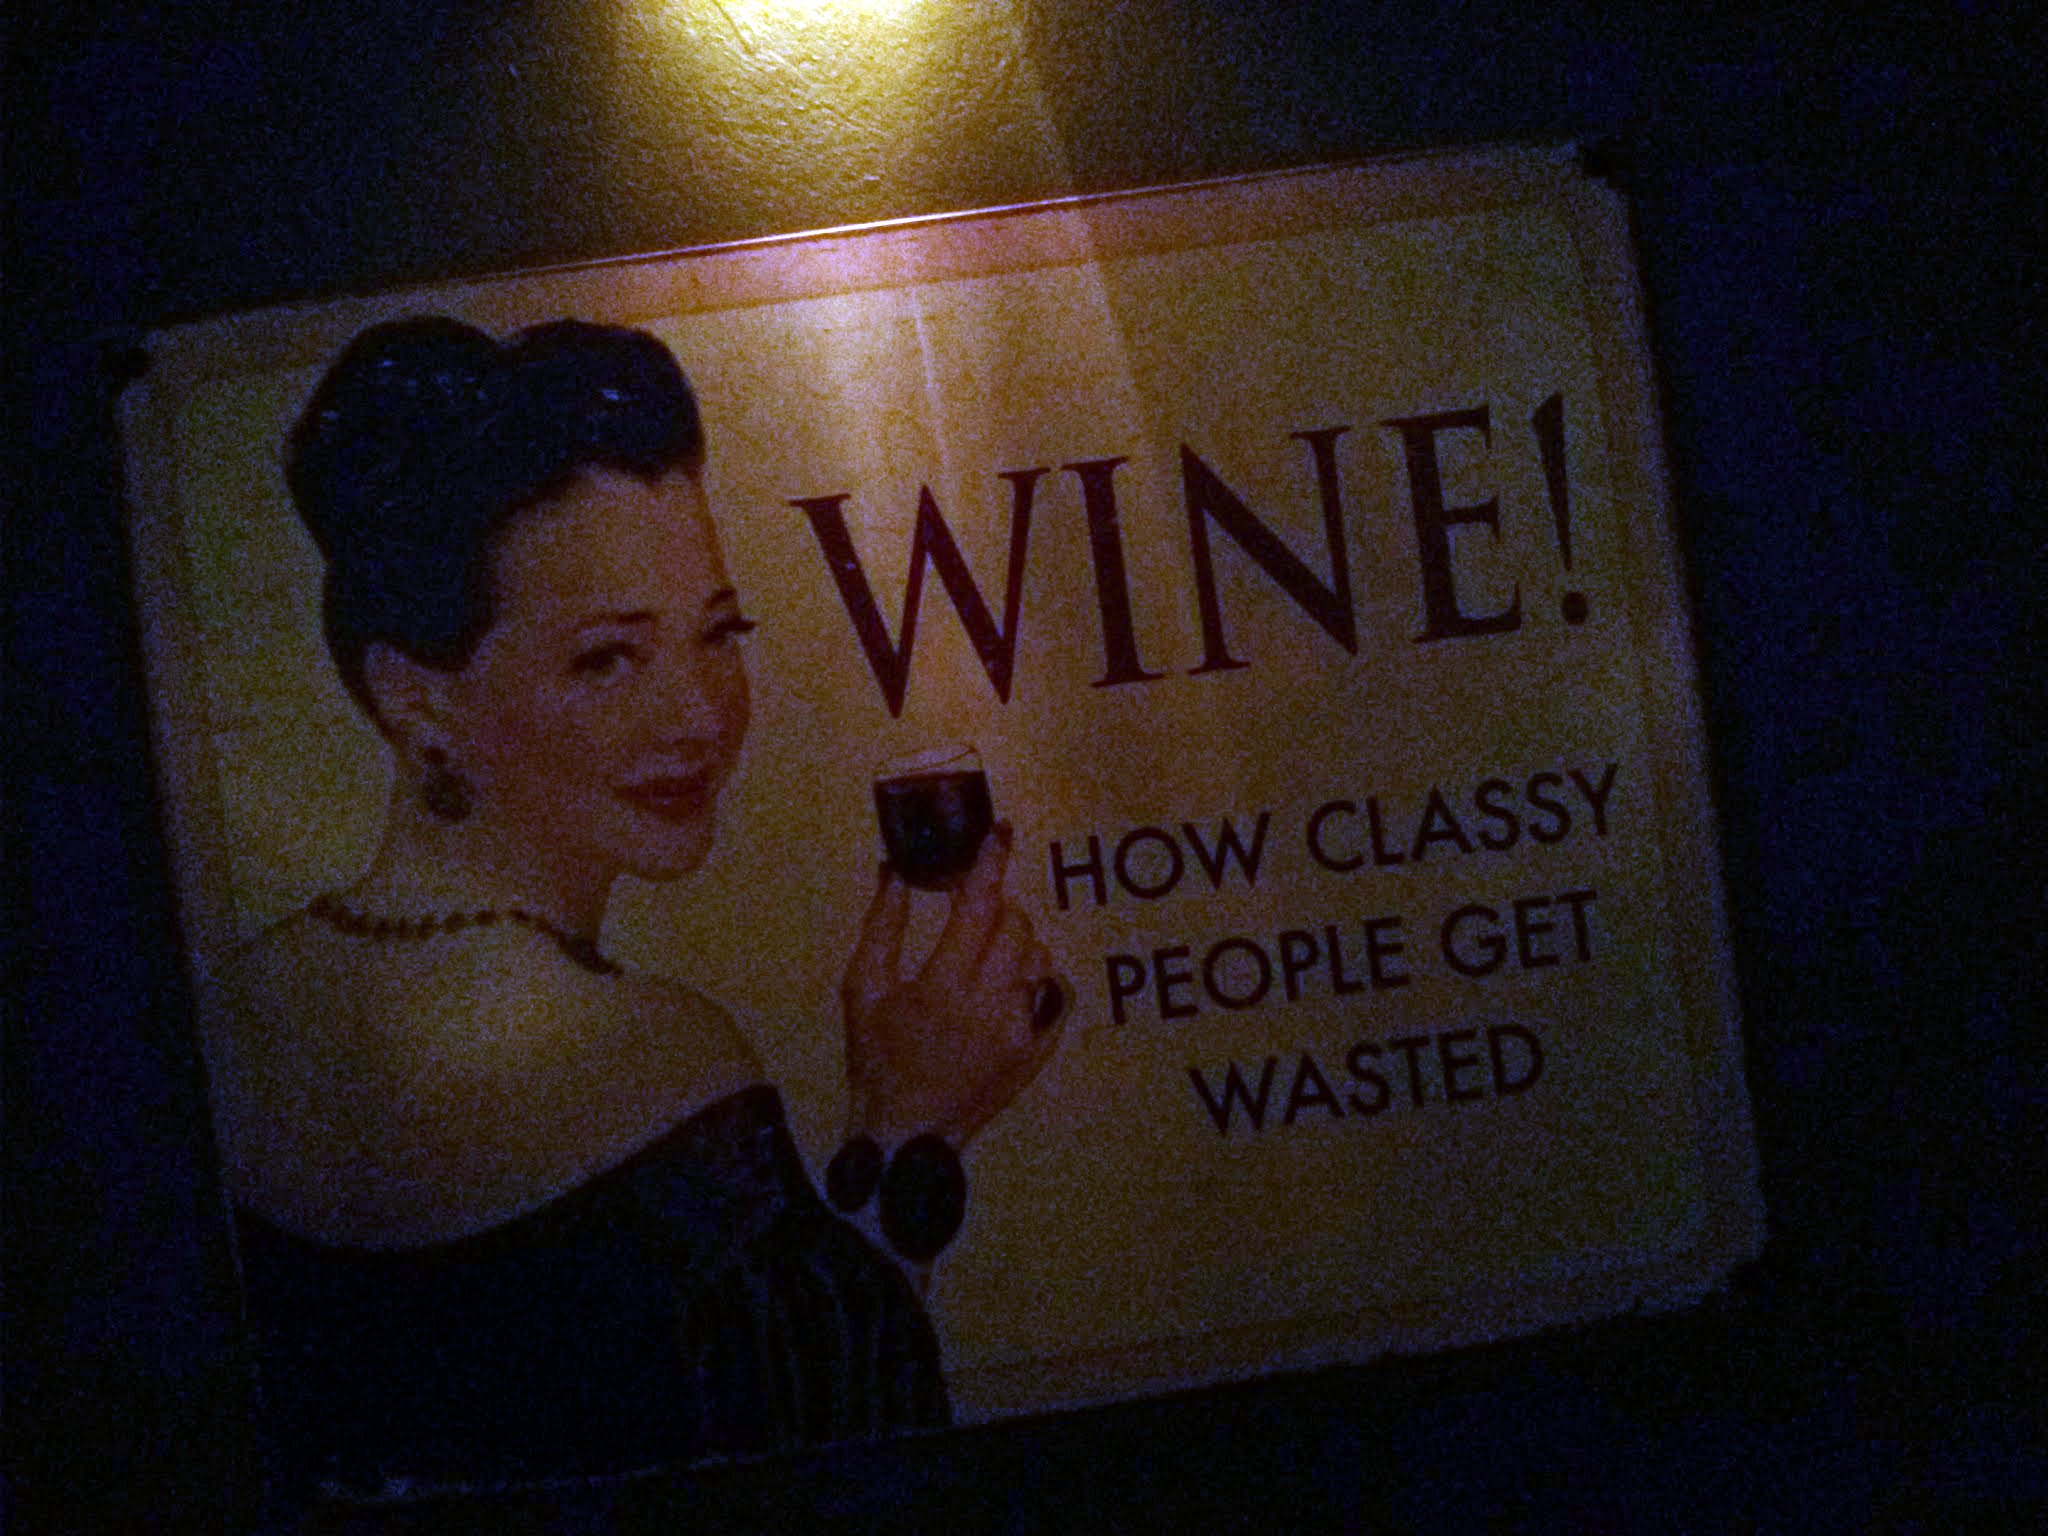 Wine. How classy people get wasted.